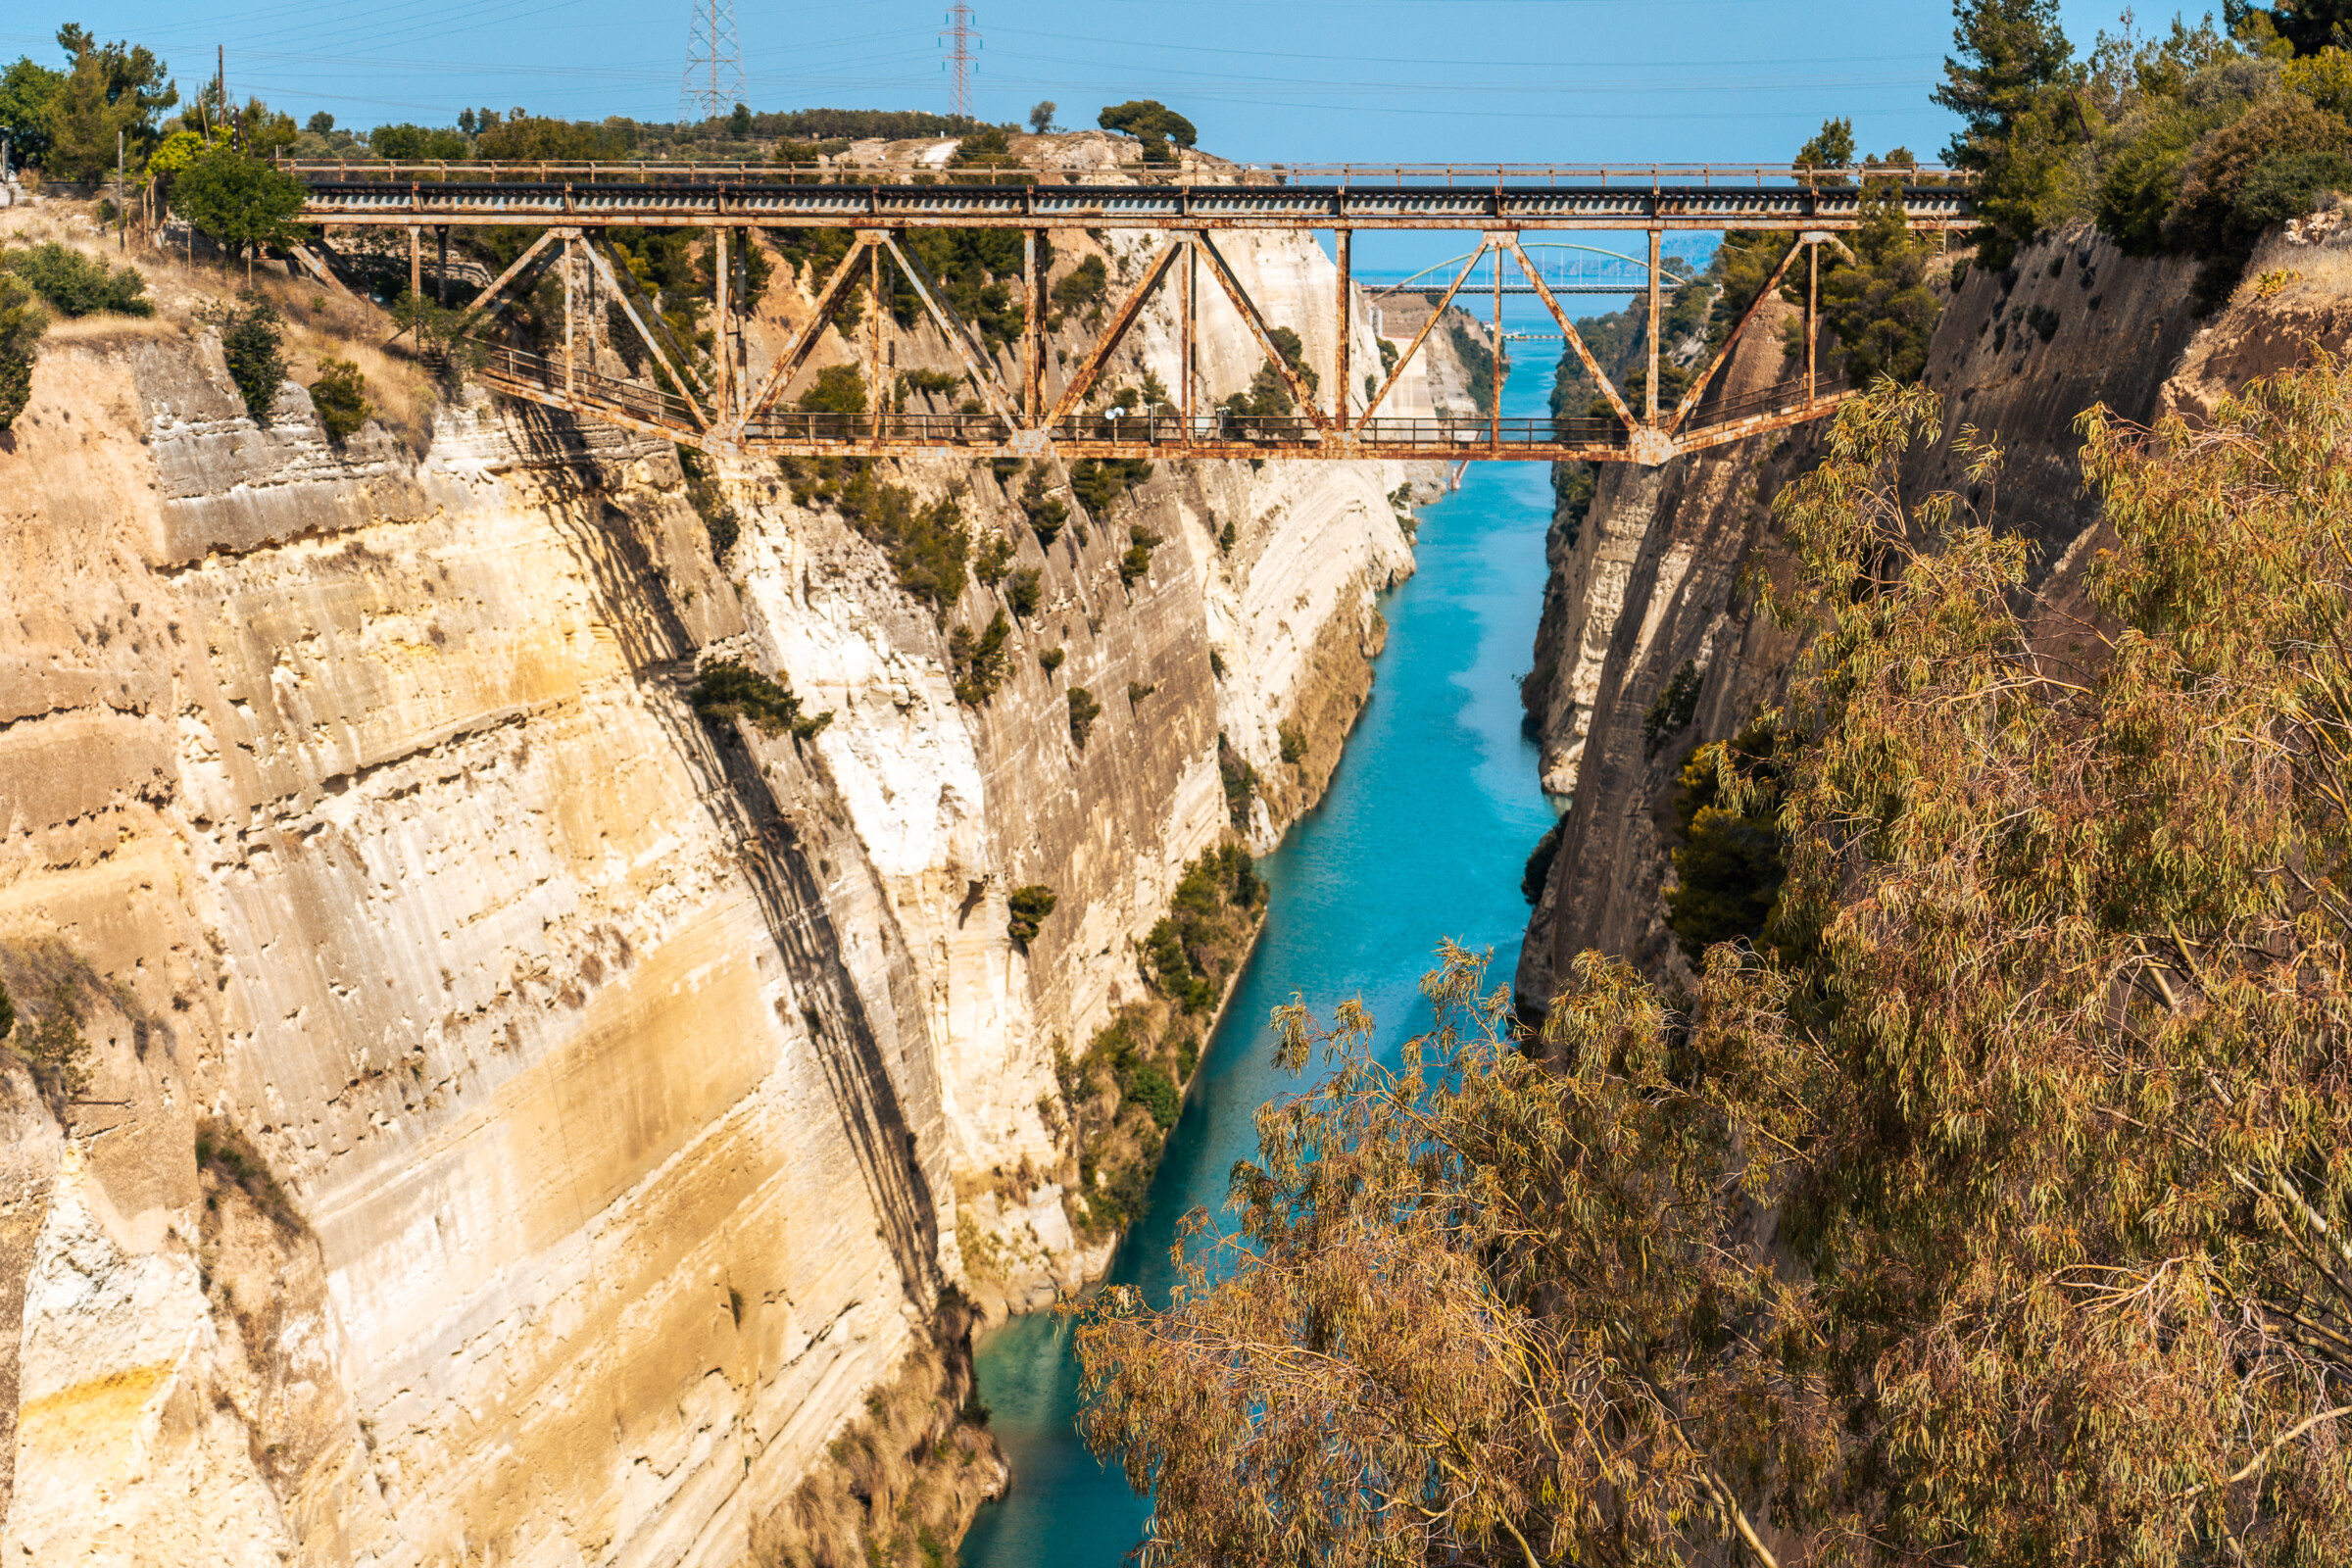 This image shows the Corinth Canal with the old - now disused - railway bridge above it. 